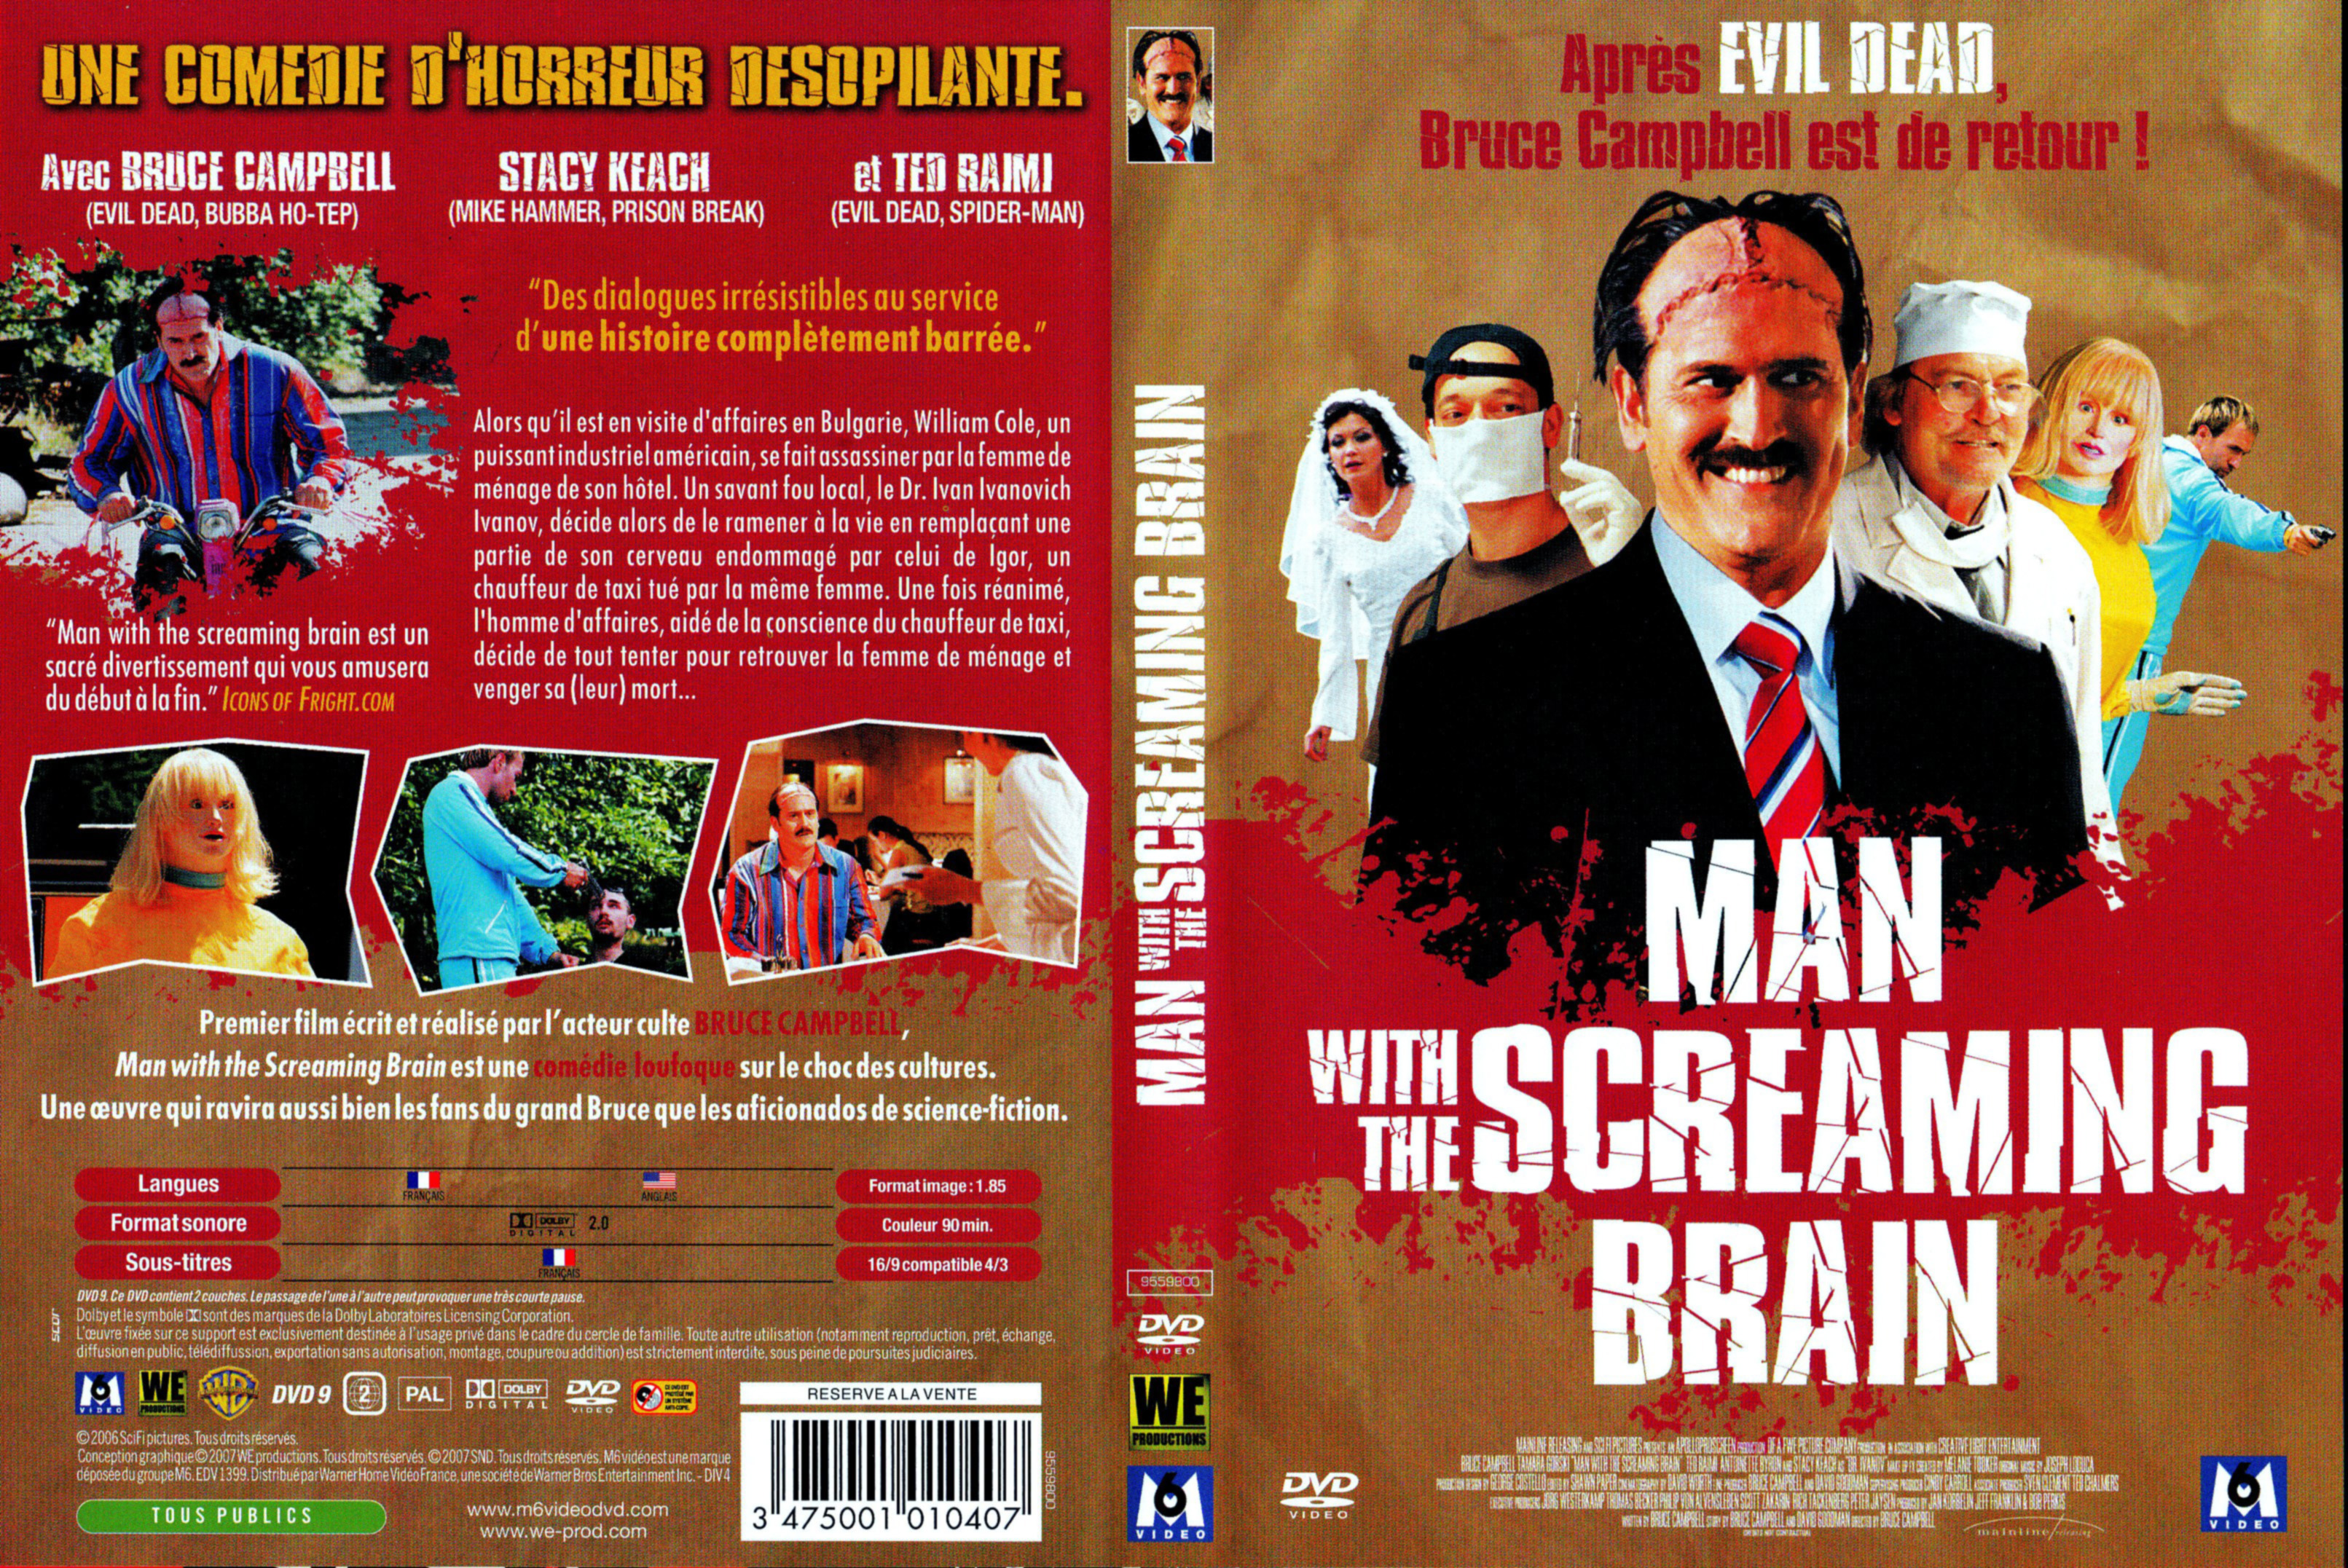 Jaquette DVD Man with the screaming brain